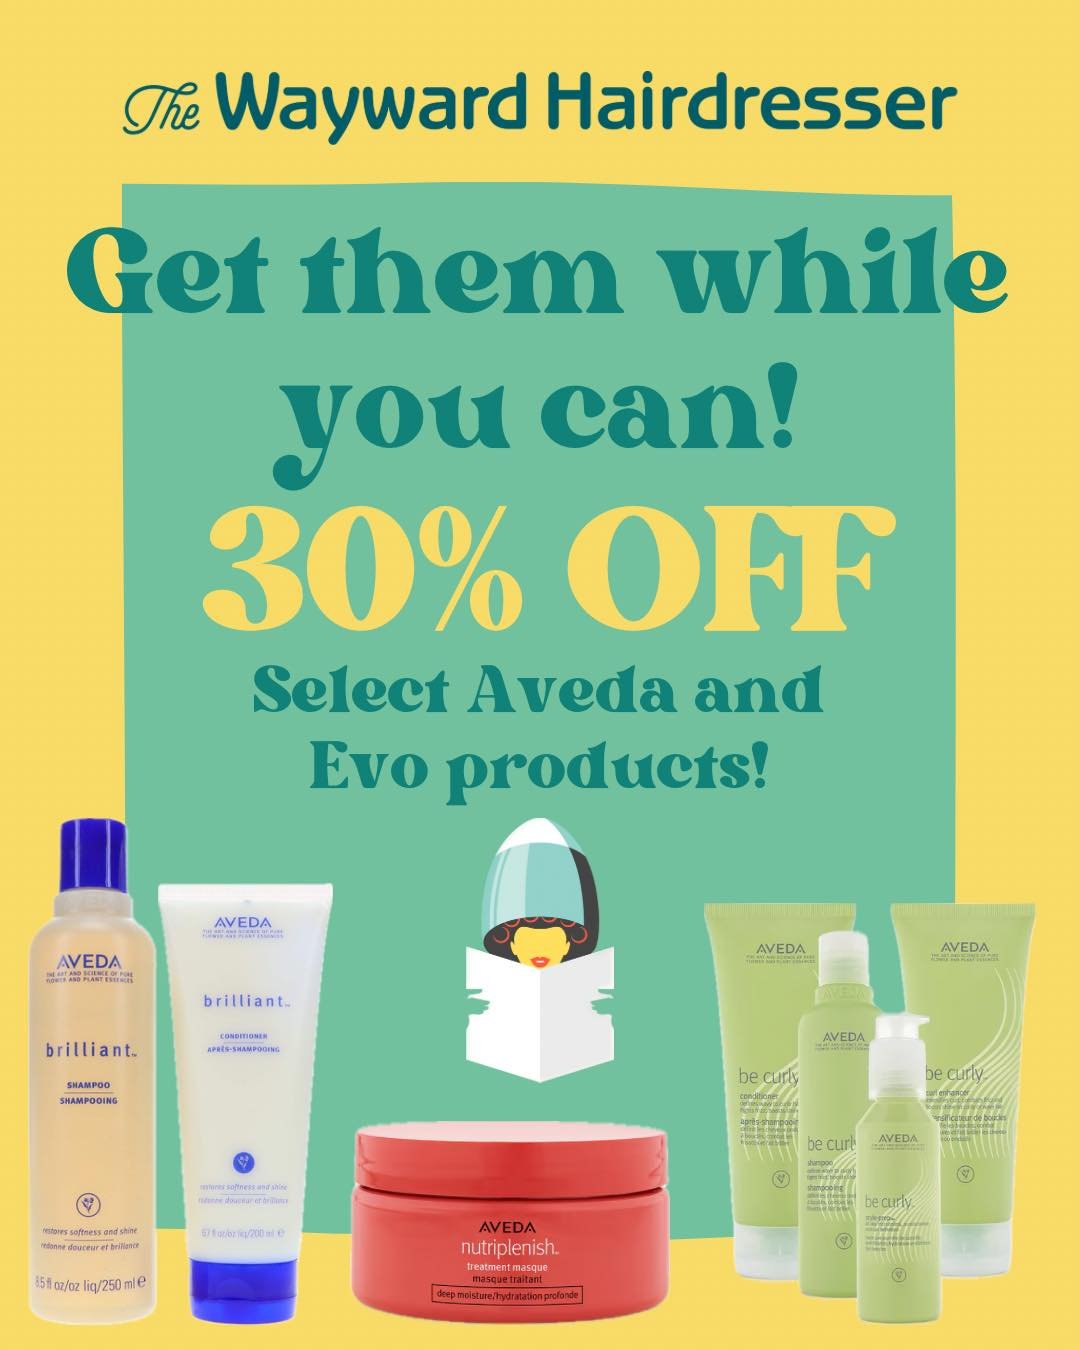 30% Select Aveda and Evo products!!🌈✨
Nutriplenish, Be Curly, Brilliant, and more!
Get them before they&rsquo;re gone!🔥
&bull;
&bull;
&bull;
#avedahaircut #avedahairsalon #avedahairproducts #avedahair #avedavegancolor #avedastylist #hairtransformat